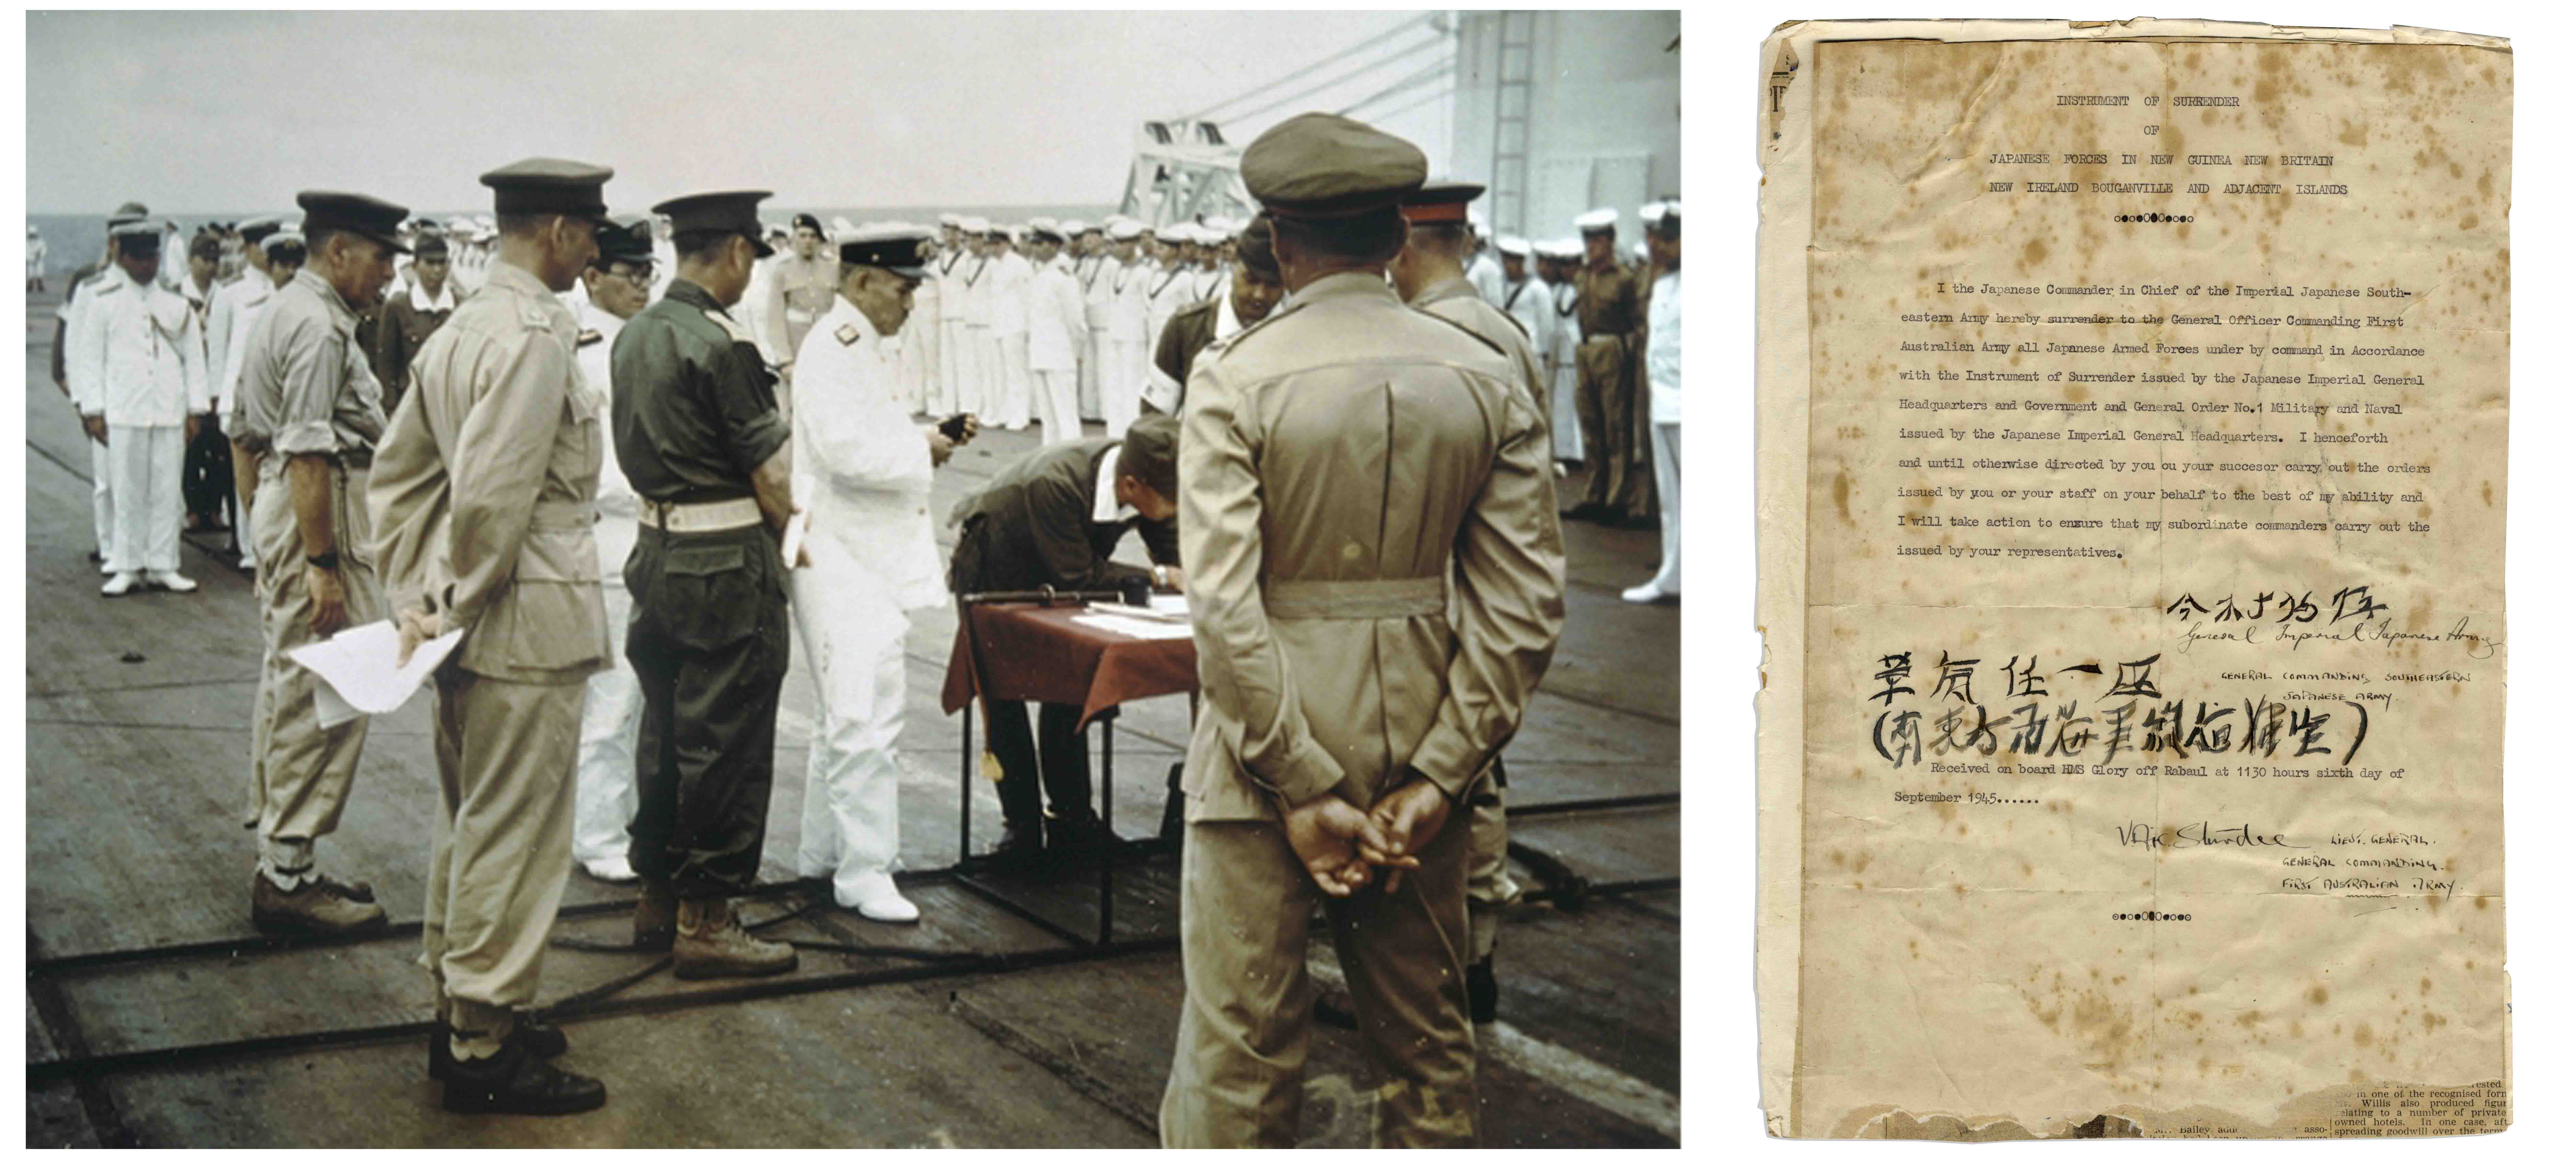 Lot Detail - Original Draft of the WWII Japanese Instrument of Surrender From 6 September 1945